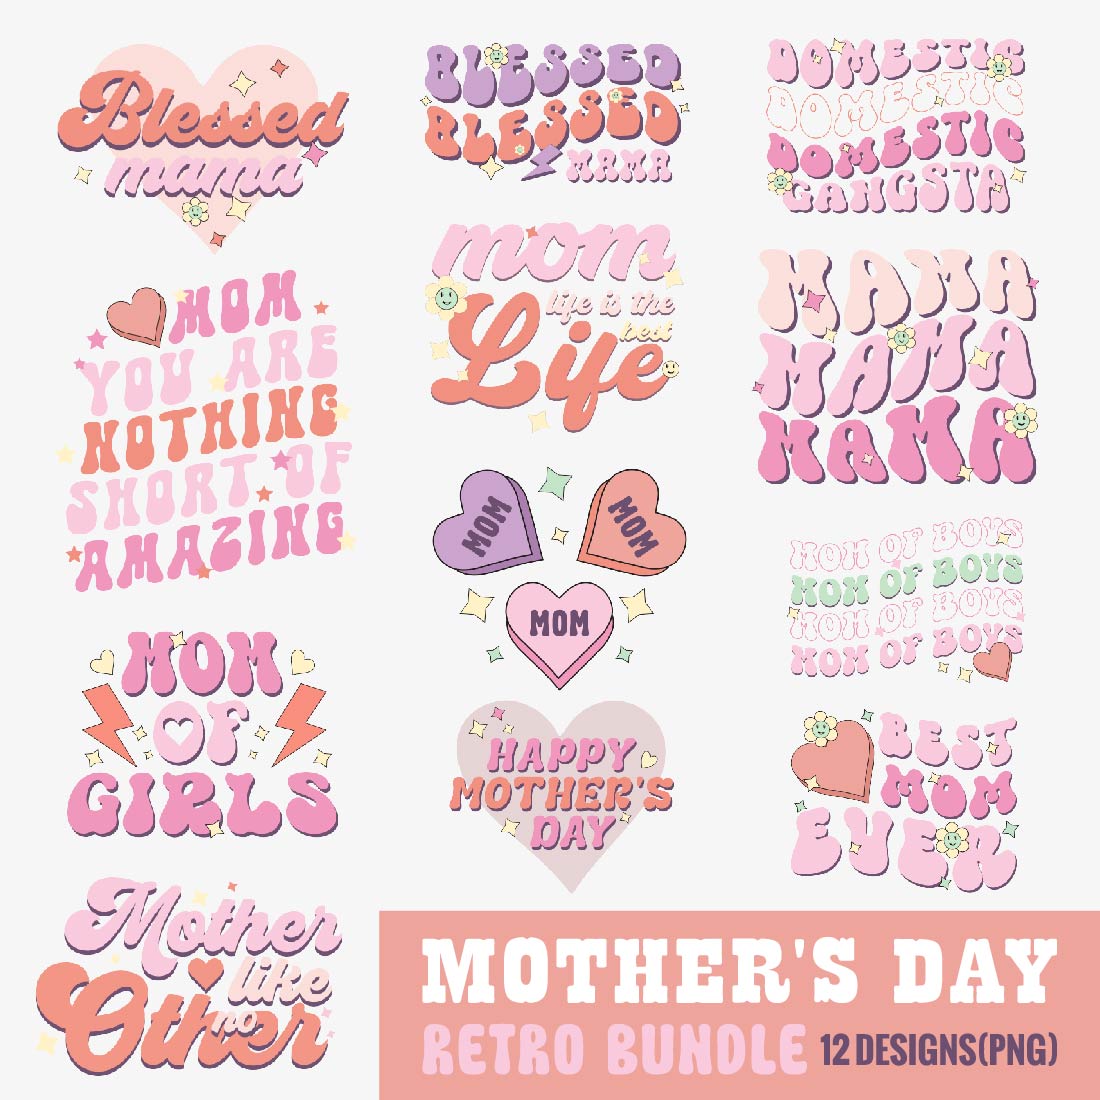 Mother's Day Retro Sublimation Bundle cover image.